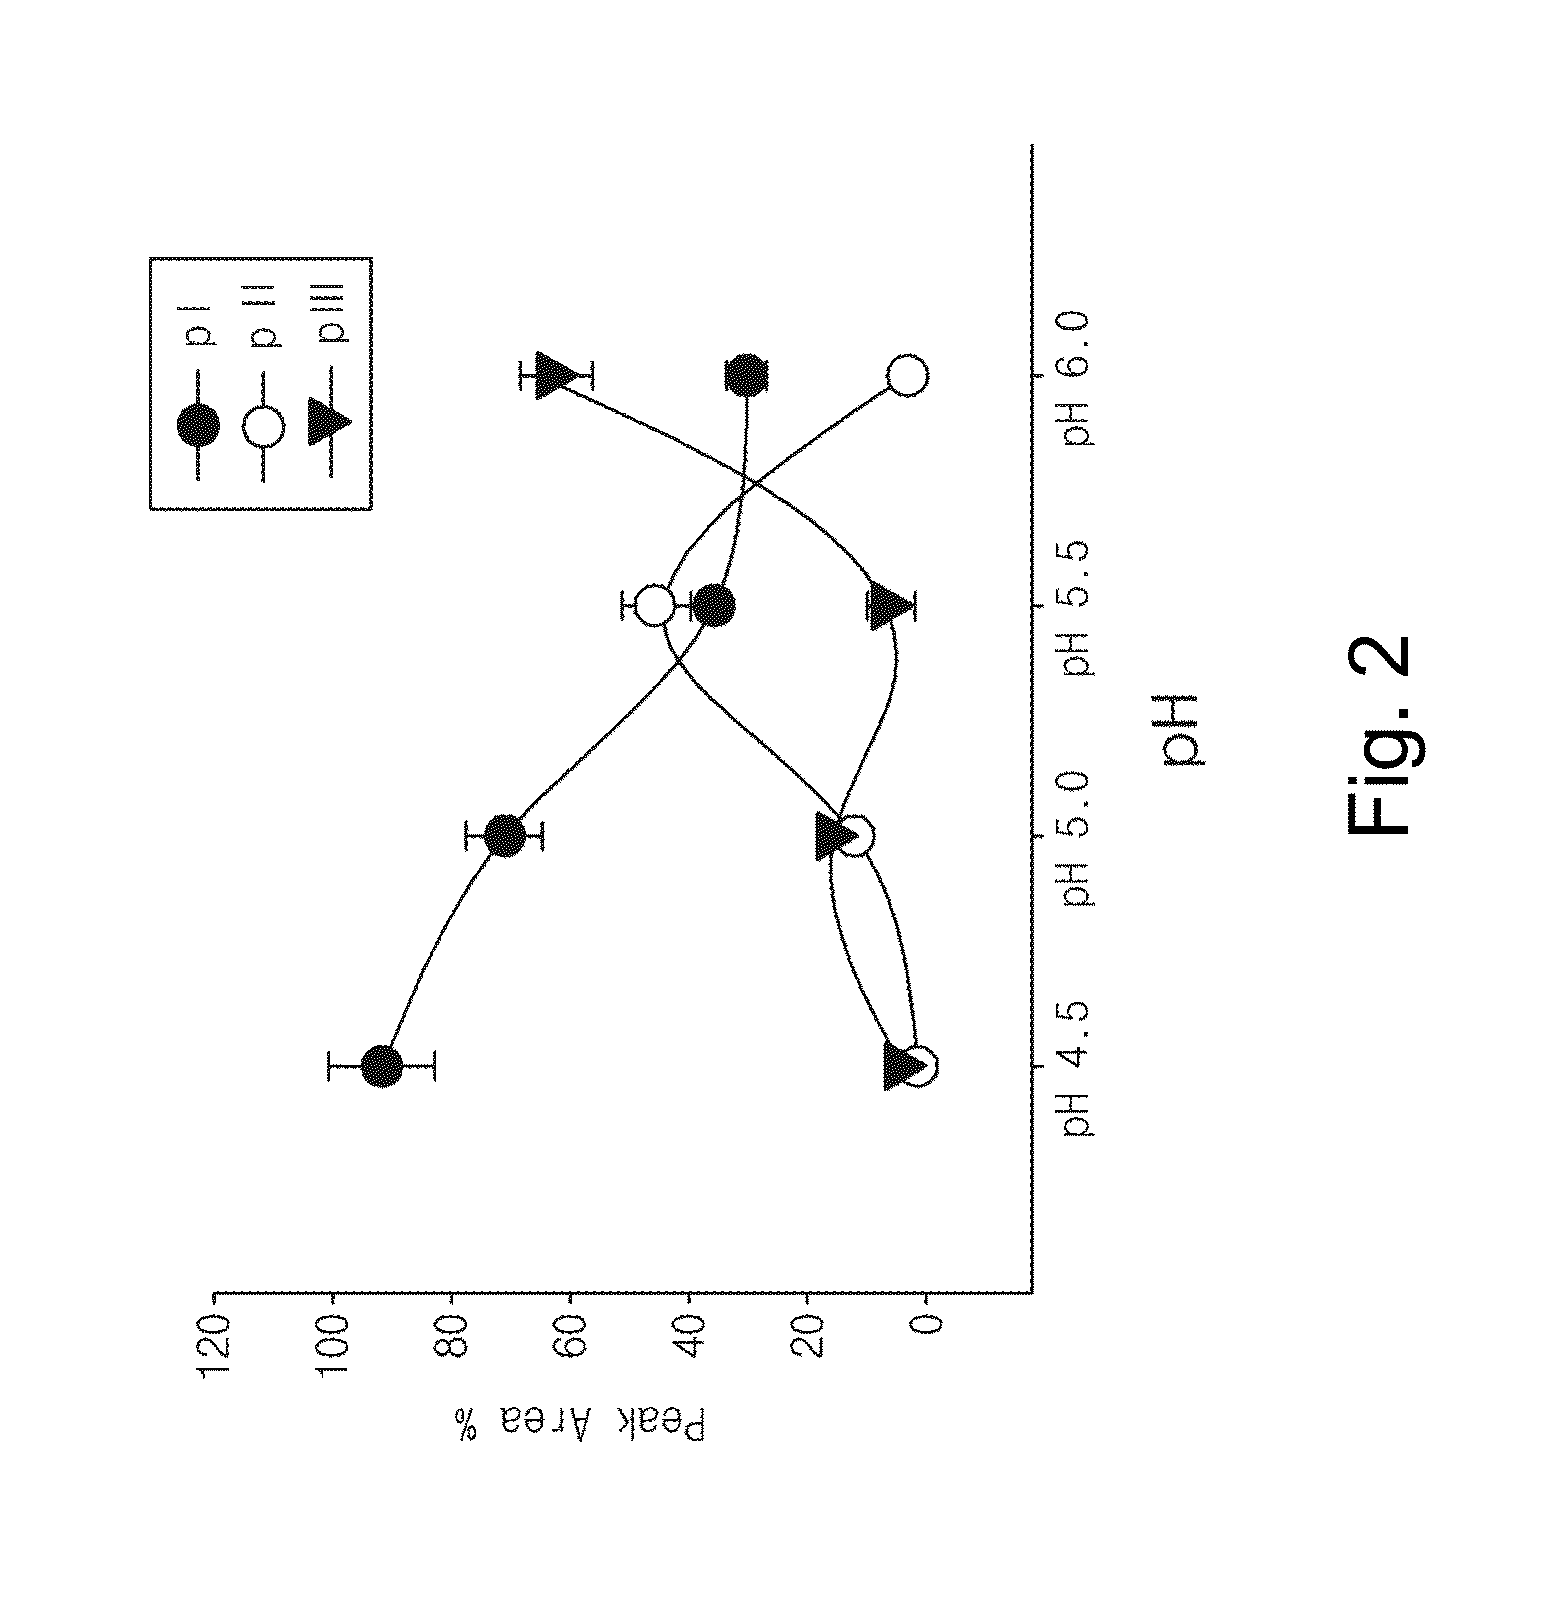 Non-diffusive botulinum toxin causing local muscle paralysis, and purification method thereof